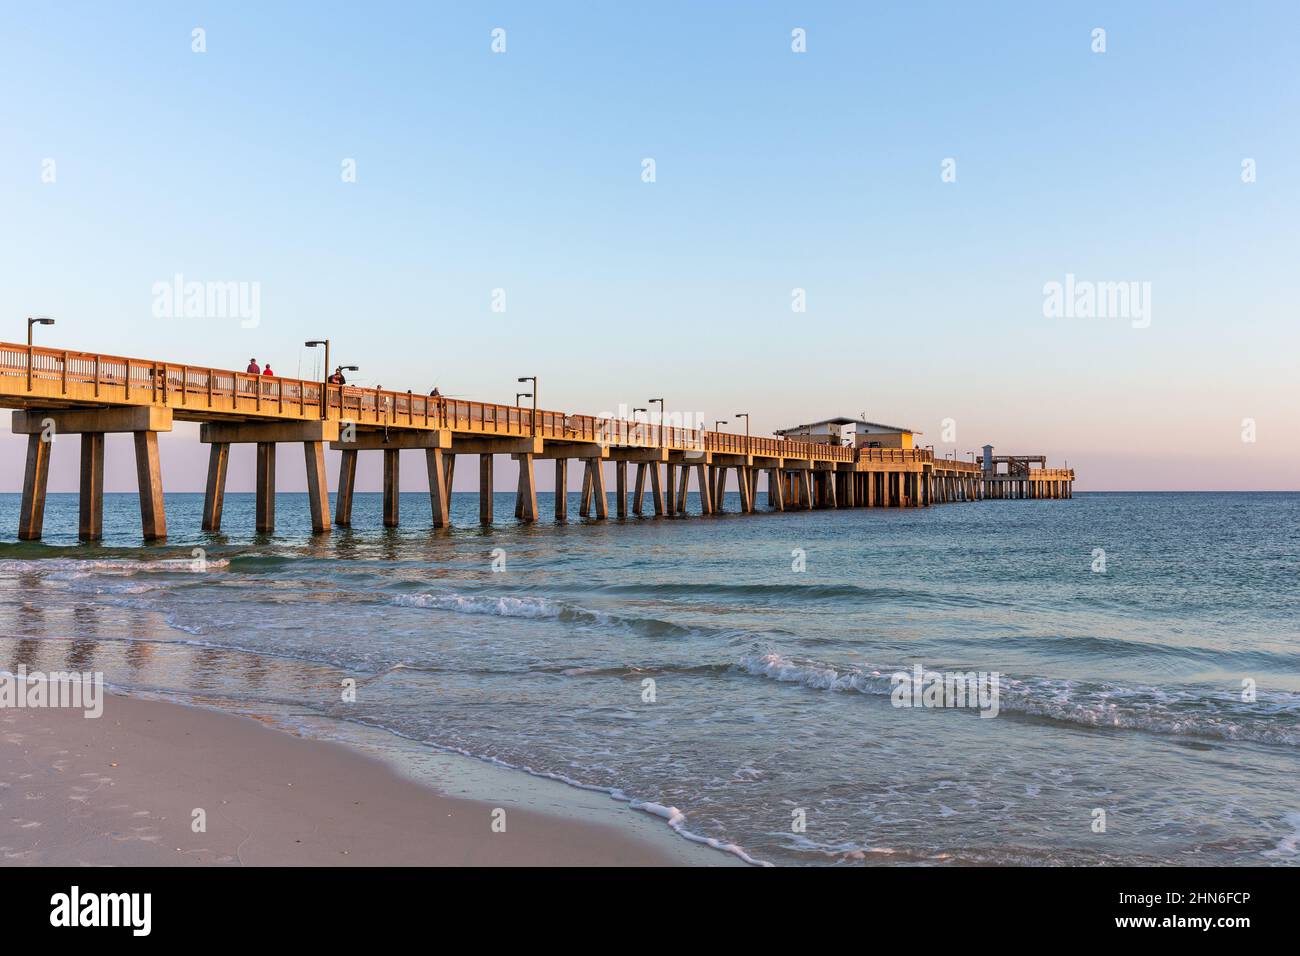 Gulf Shores, AL - March 6, 2021: The Gulf State Park Pier is a popular destination due to its scenic views and fishing opportunities.  The pier was da Stock Photo